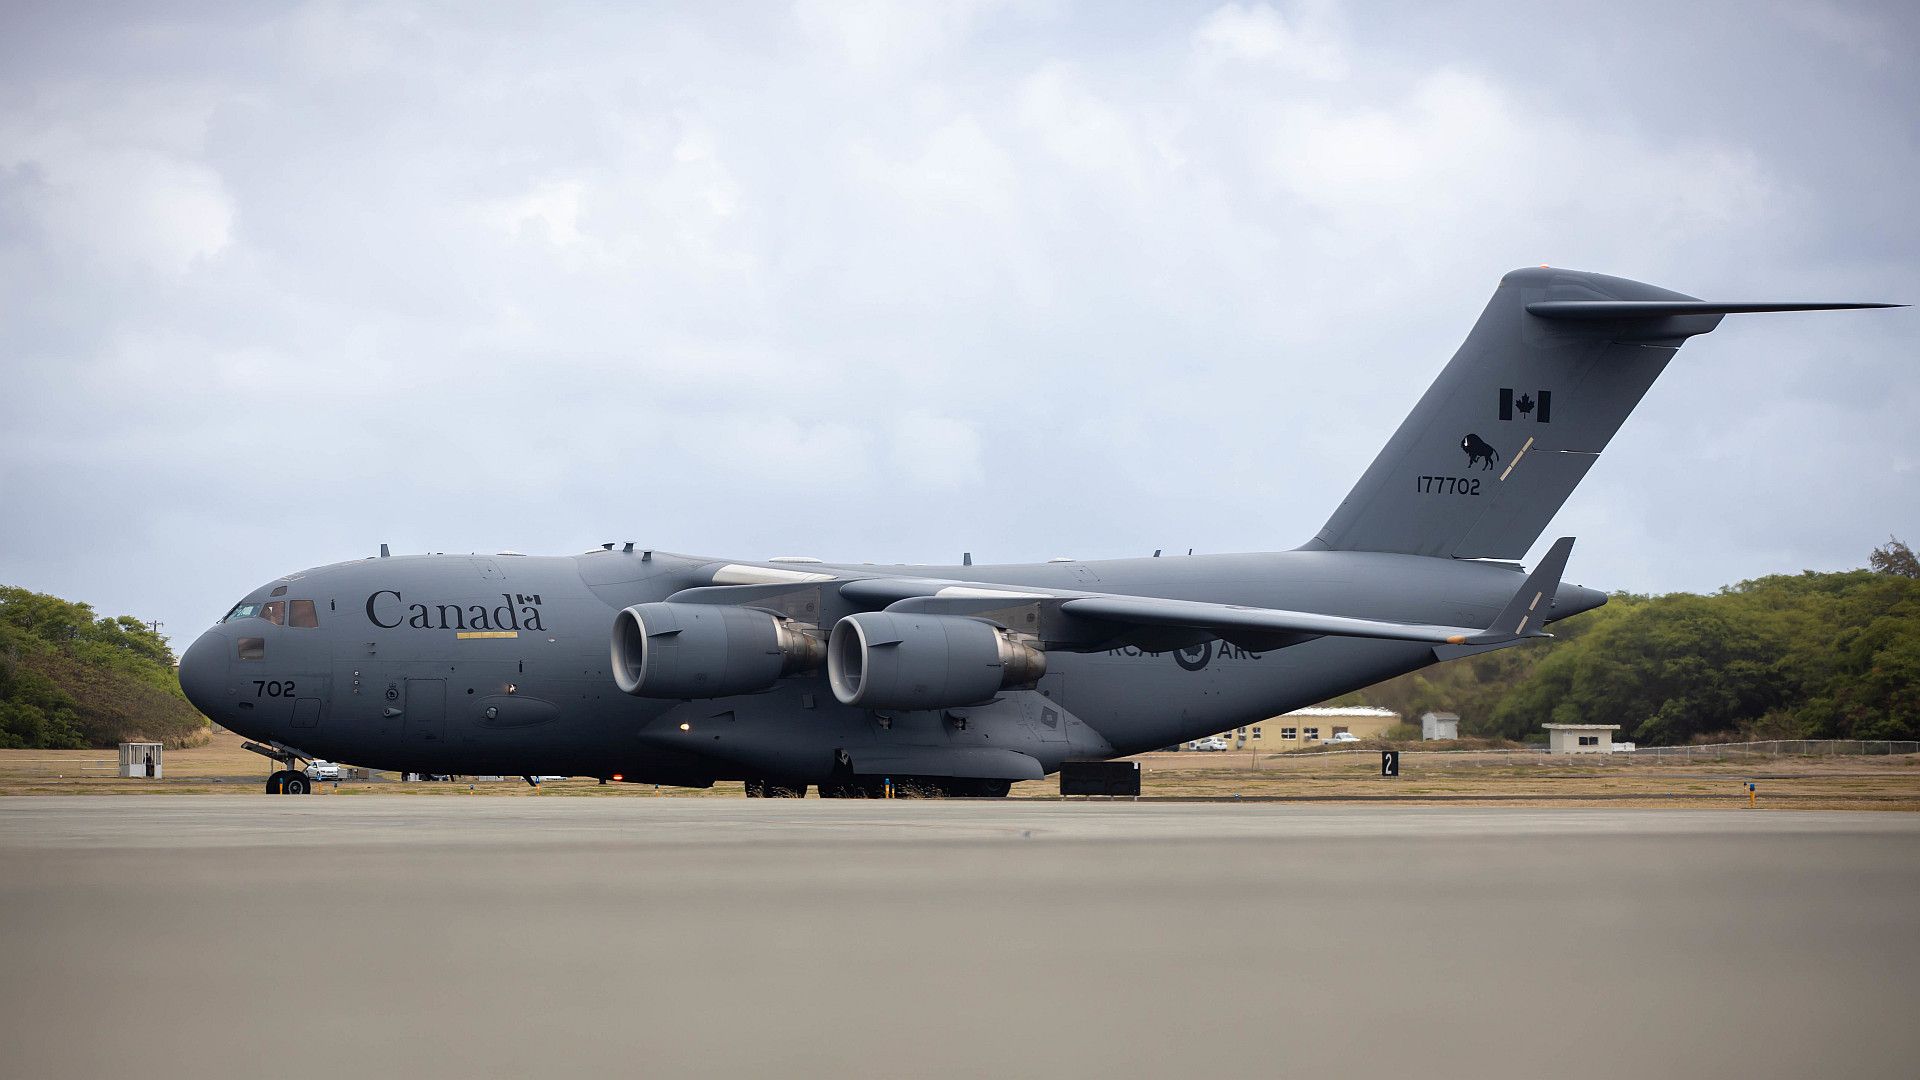 177 Globemaster From 429 Transport Squadron Lands At Marine Corps Base Hawaii During Rim Of The Pacific